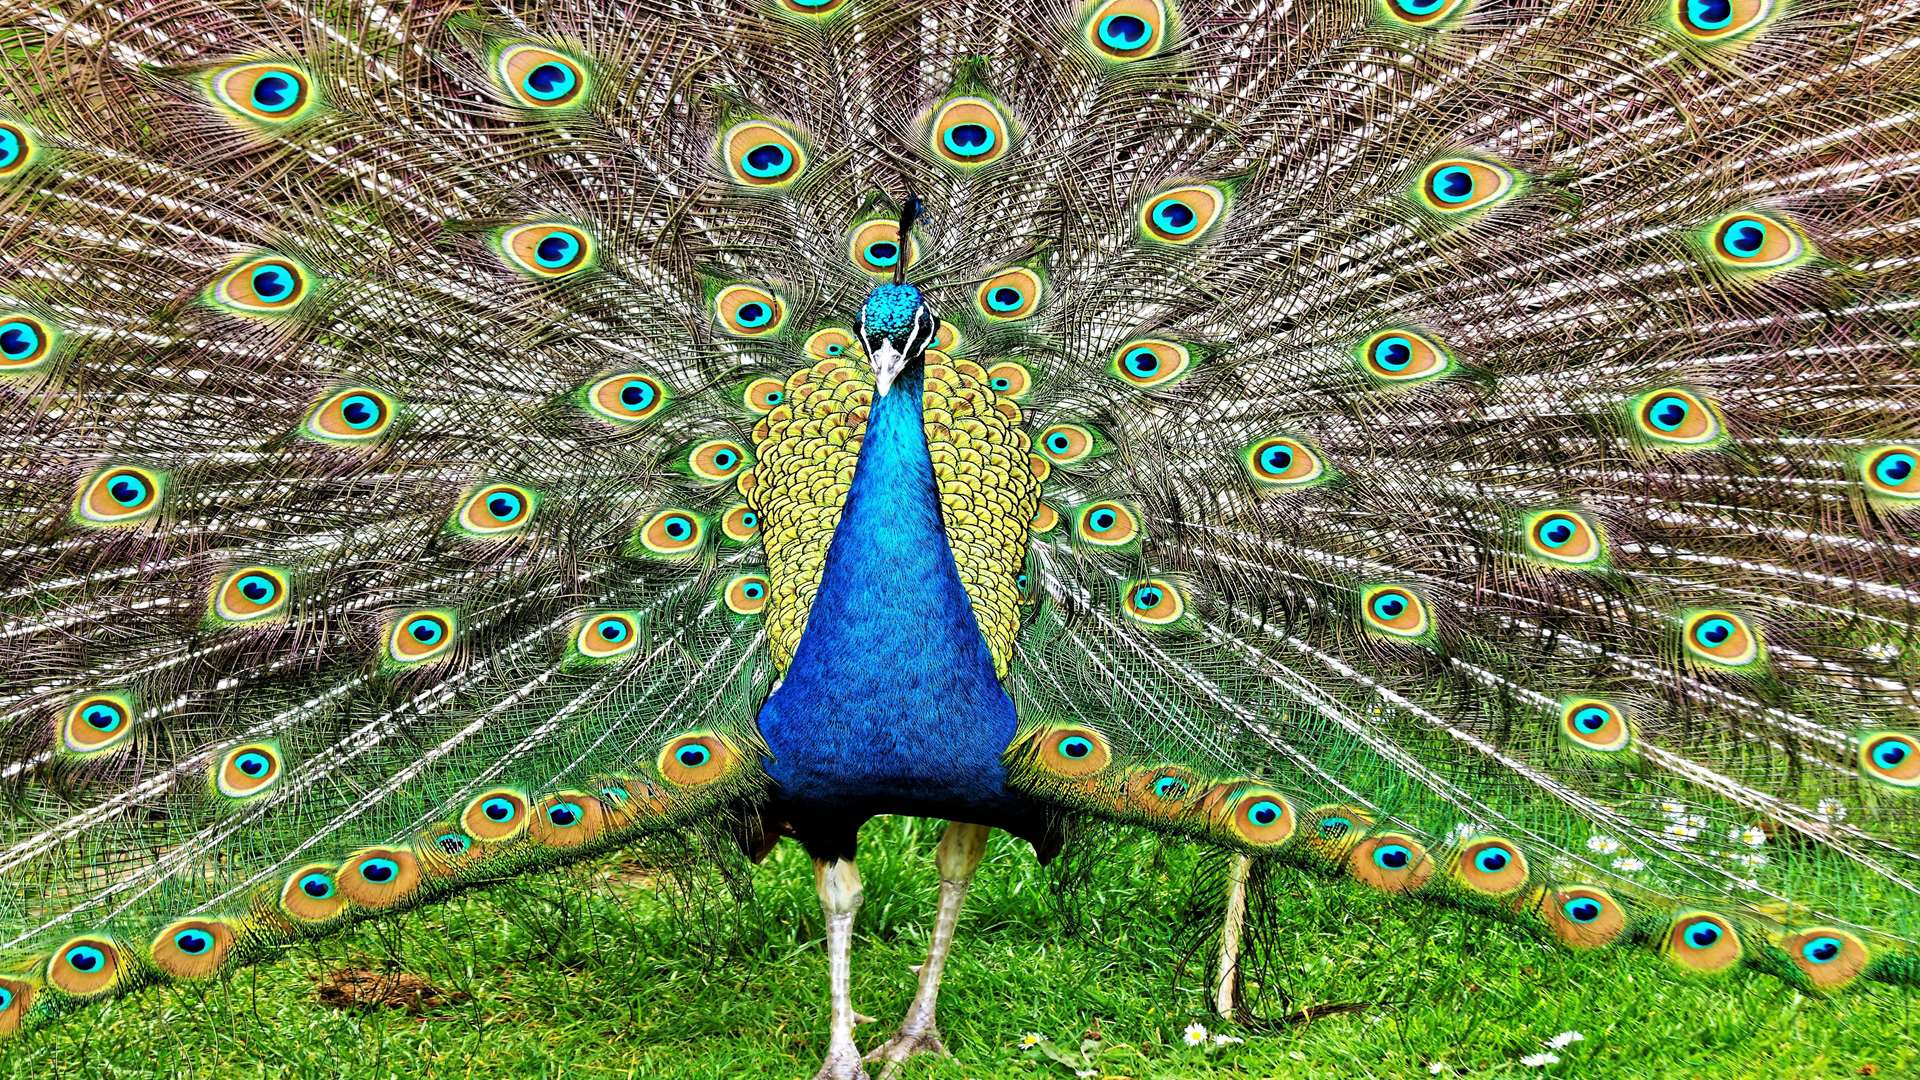 Terry Vick took this image of a peacock in full pomp at Howletts